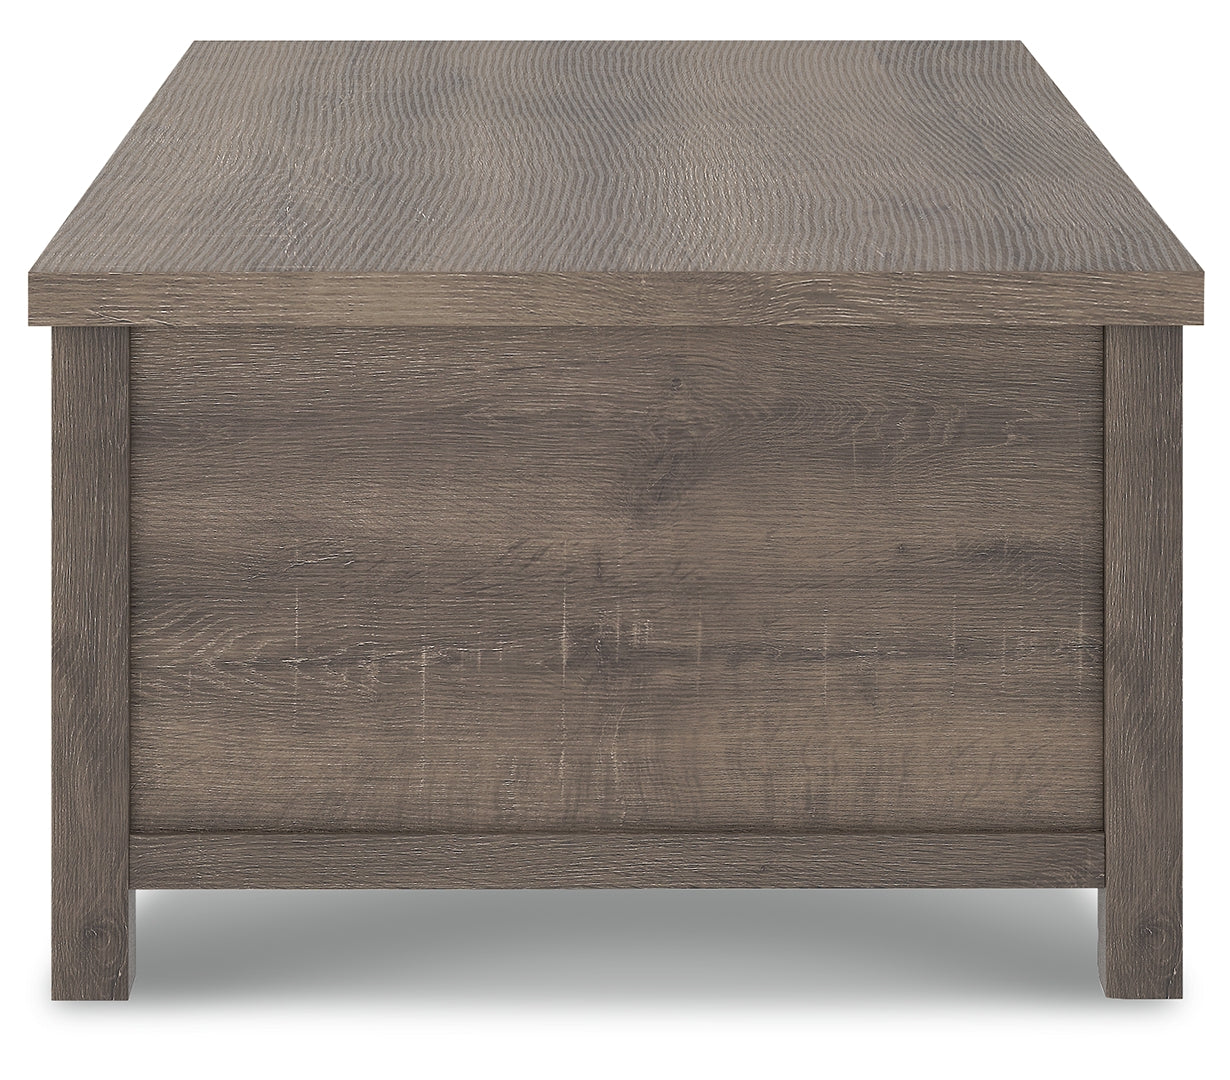 Arlenbry Coffee Table with Lift Top